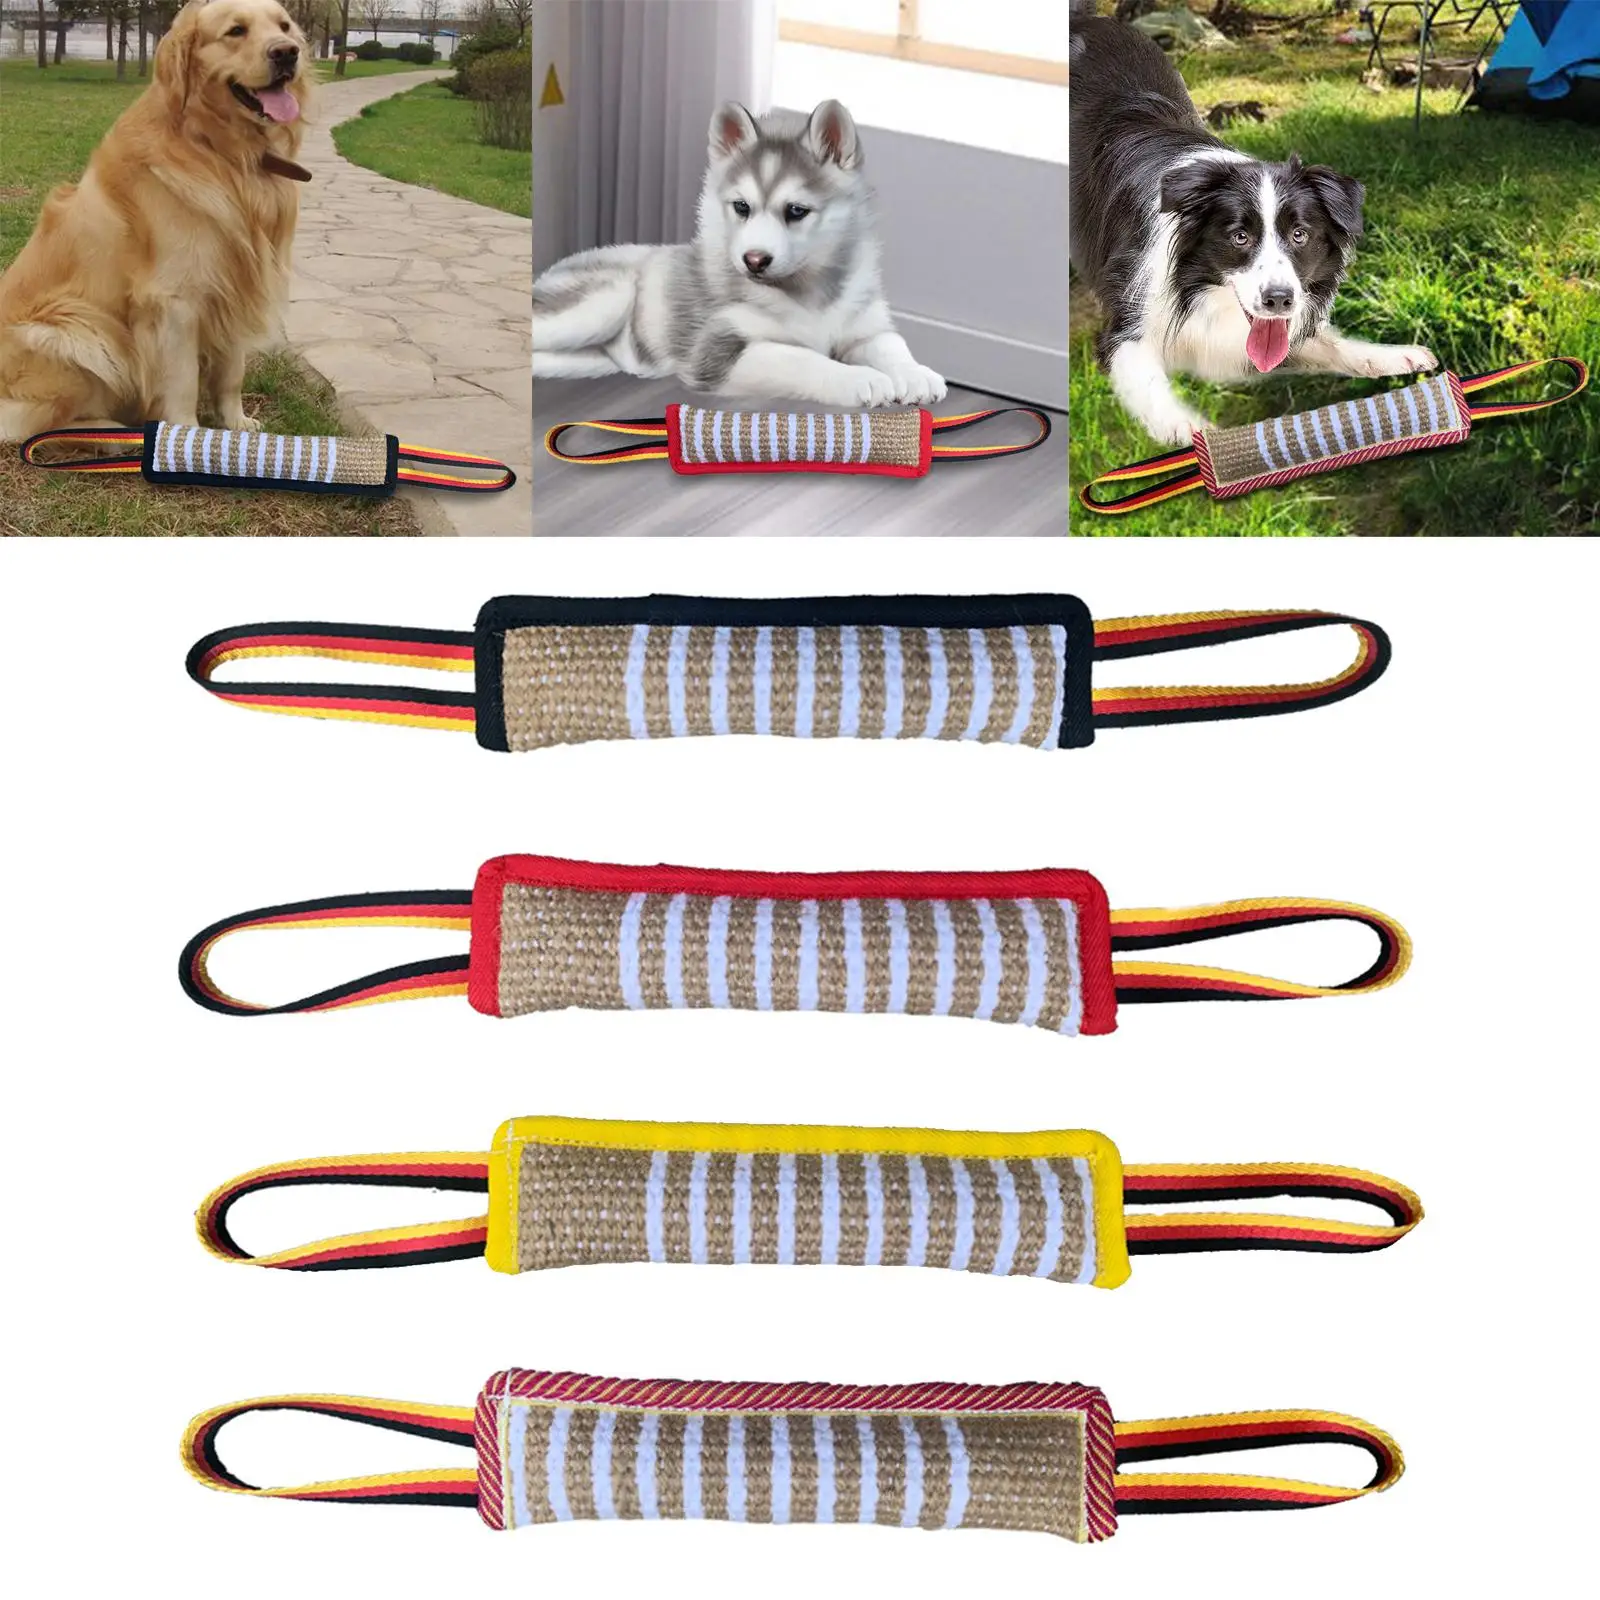 Durable Dog Bite Tug Toy Bite Sleeve Stick Training Bite Pillow for Puppy